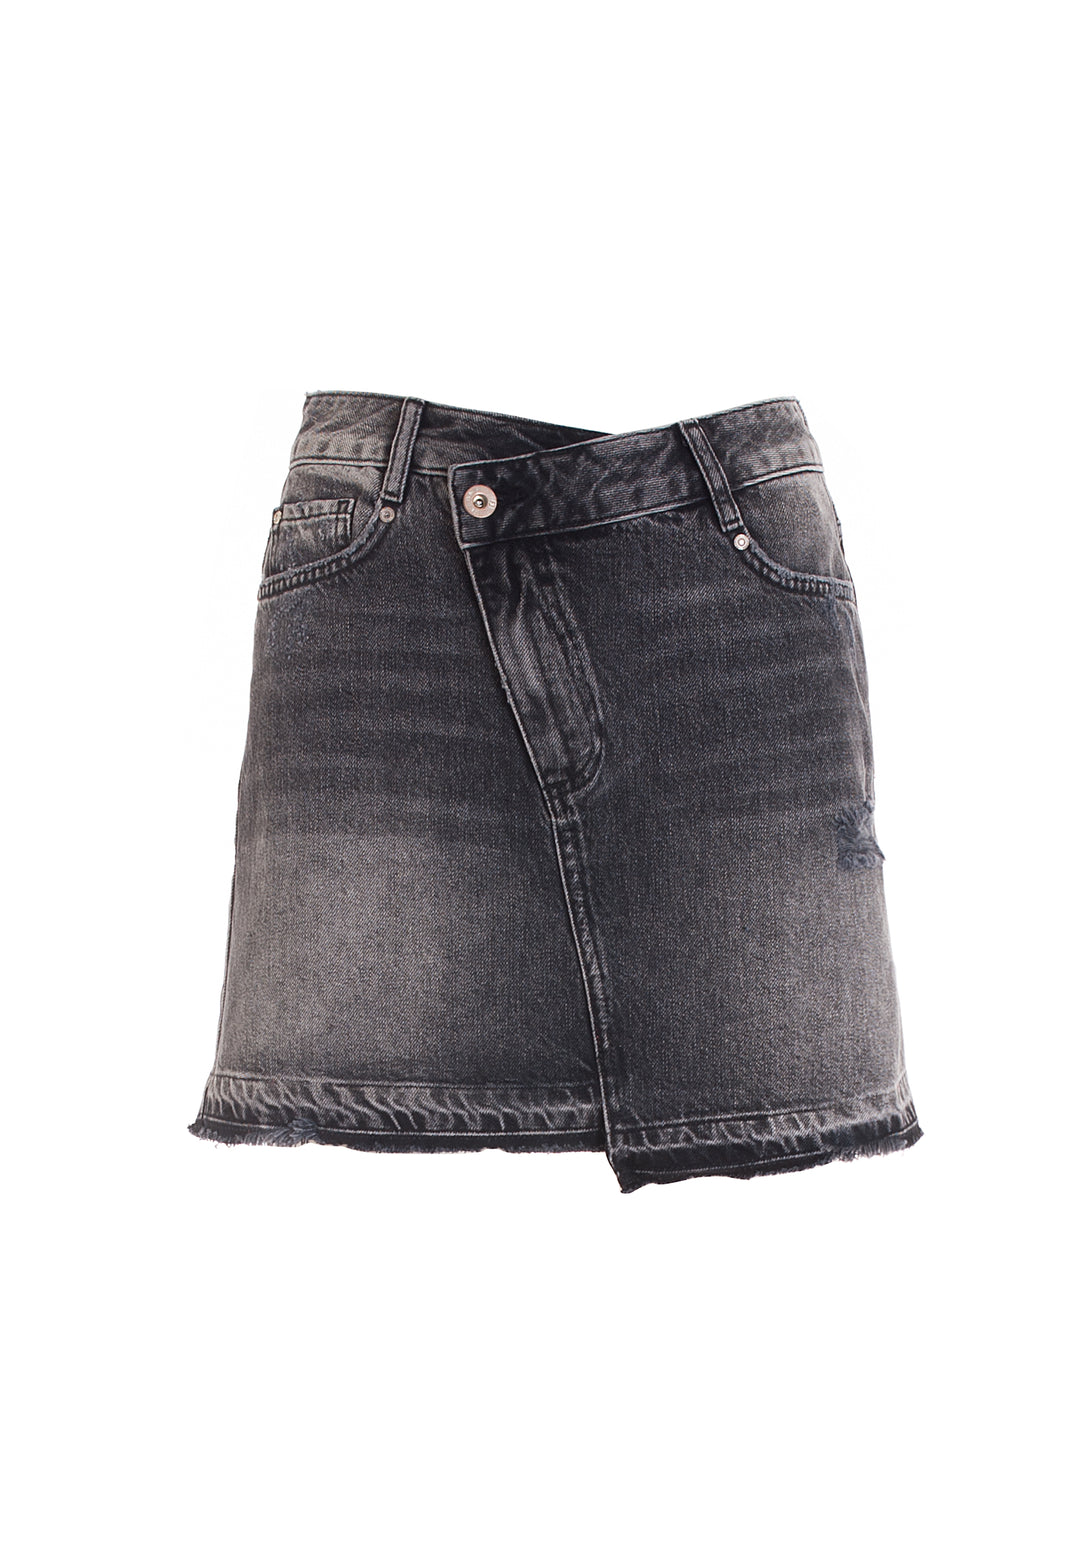 Mini skirt slim fit made in black denim with strong wash